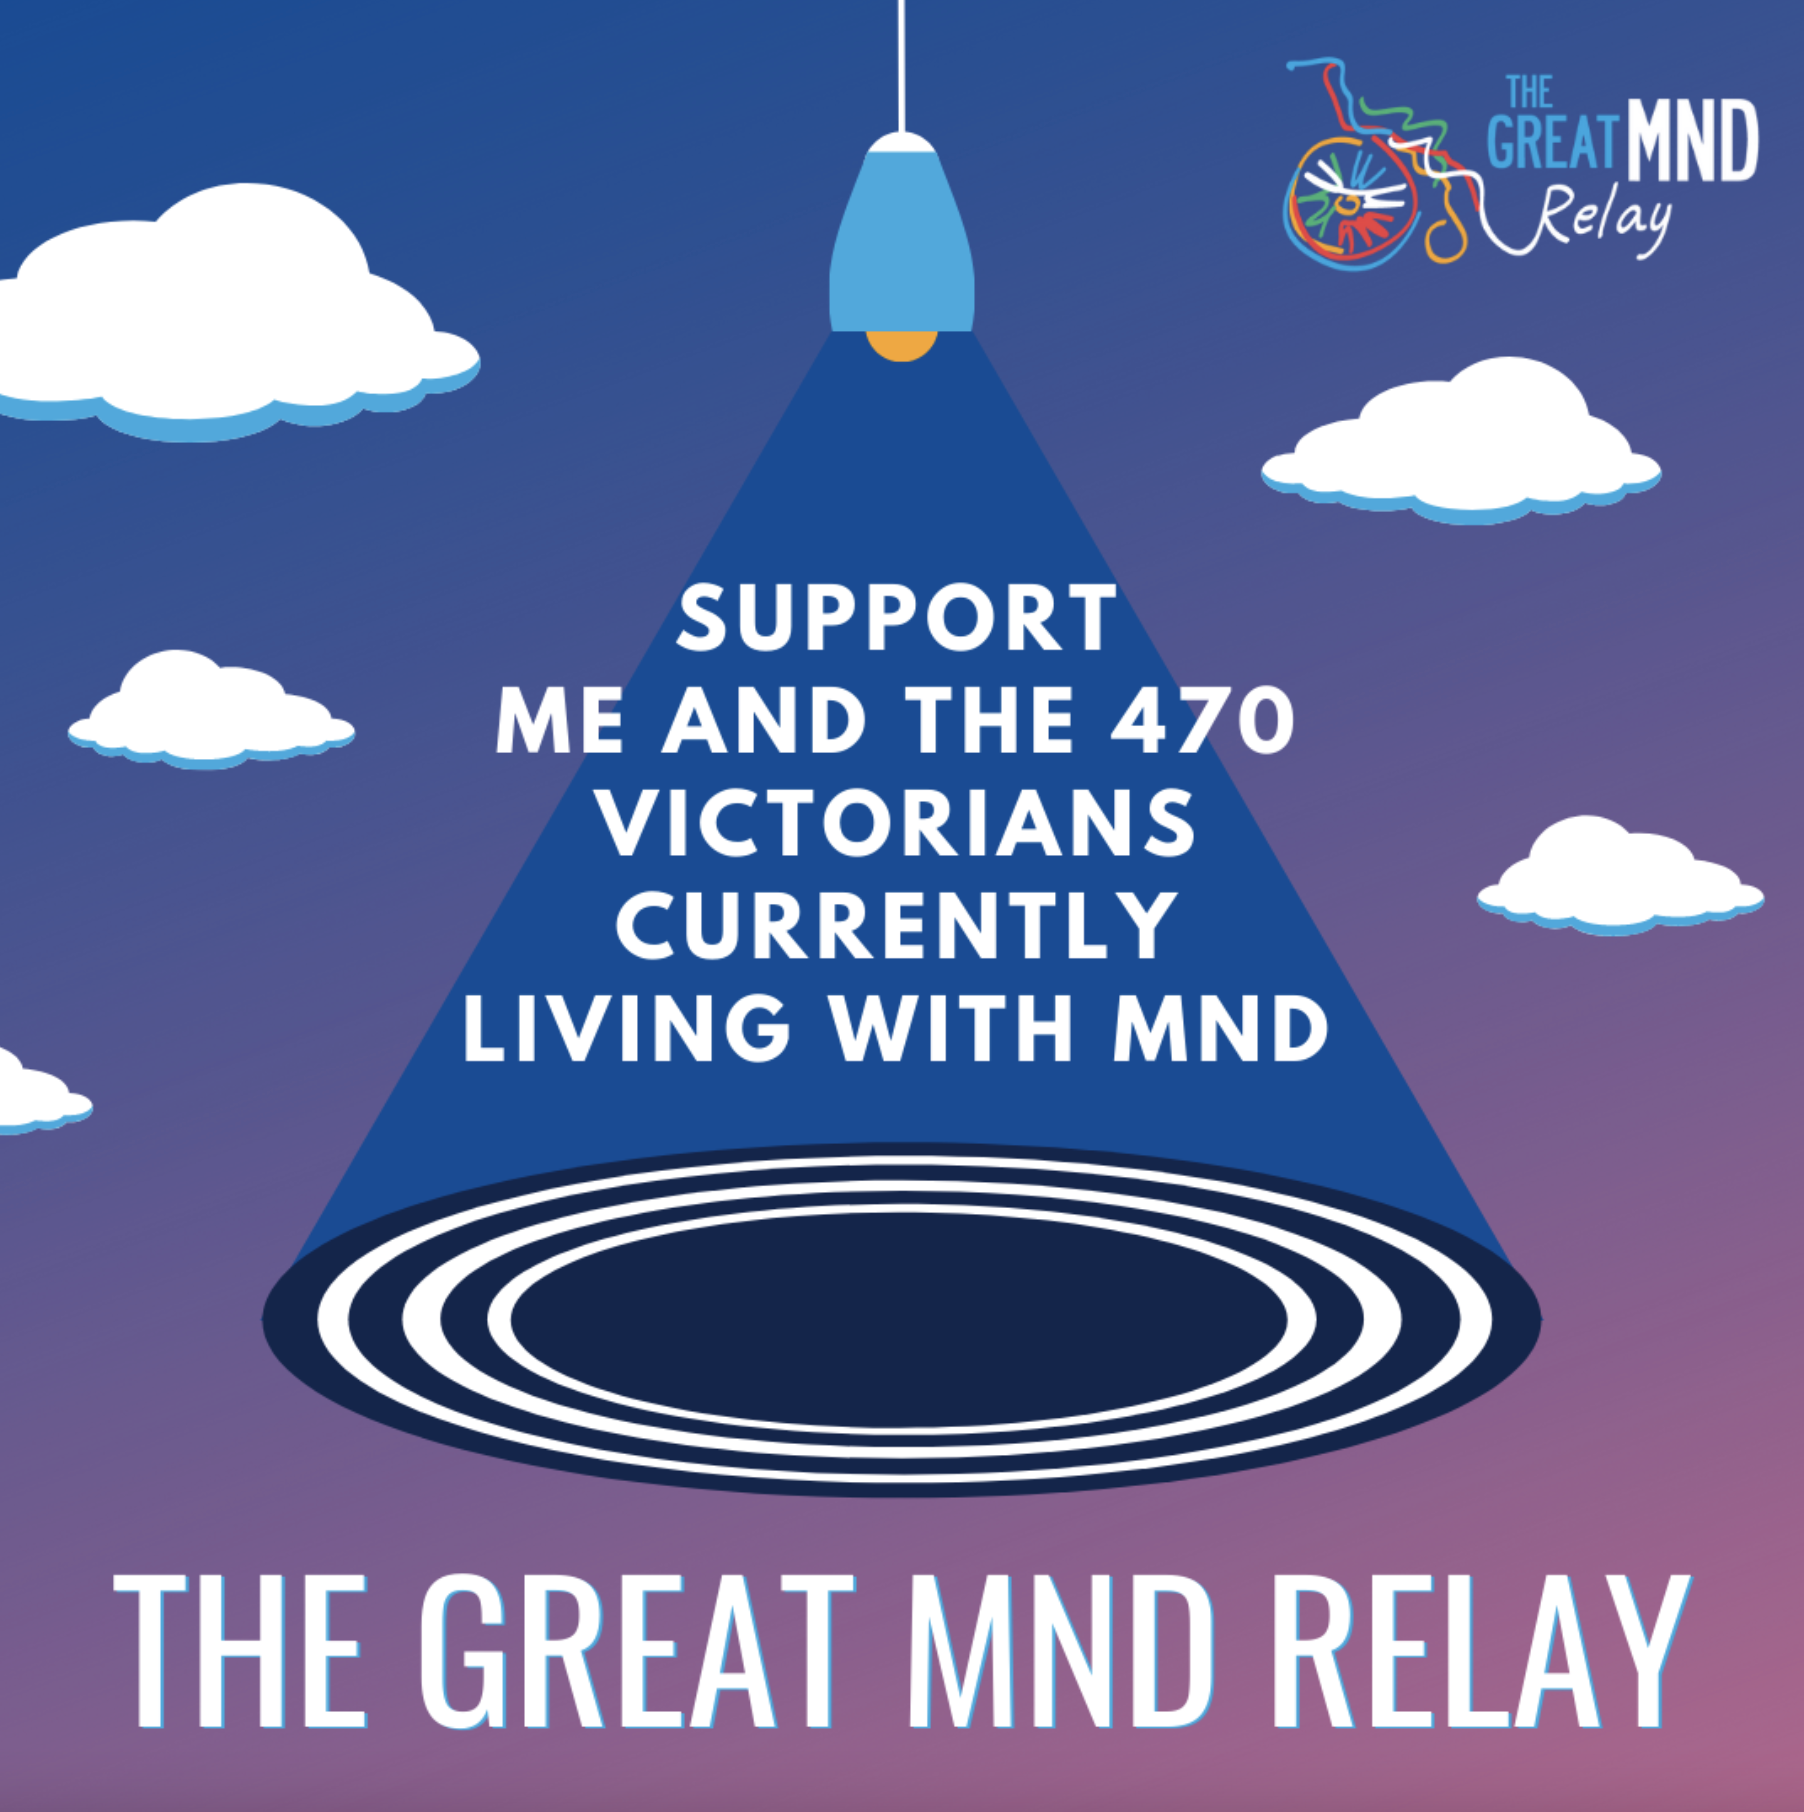 We are taking part in the fight against MND.